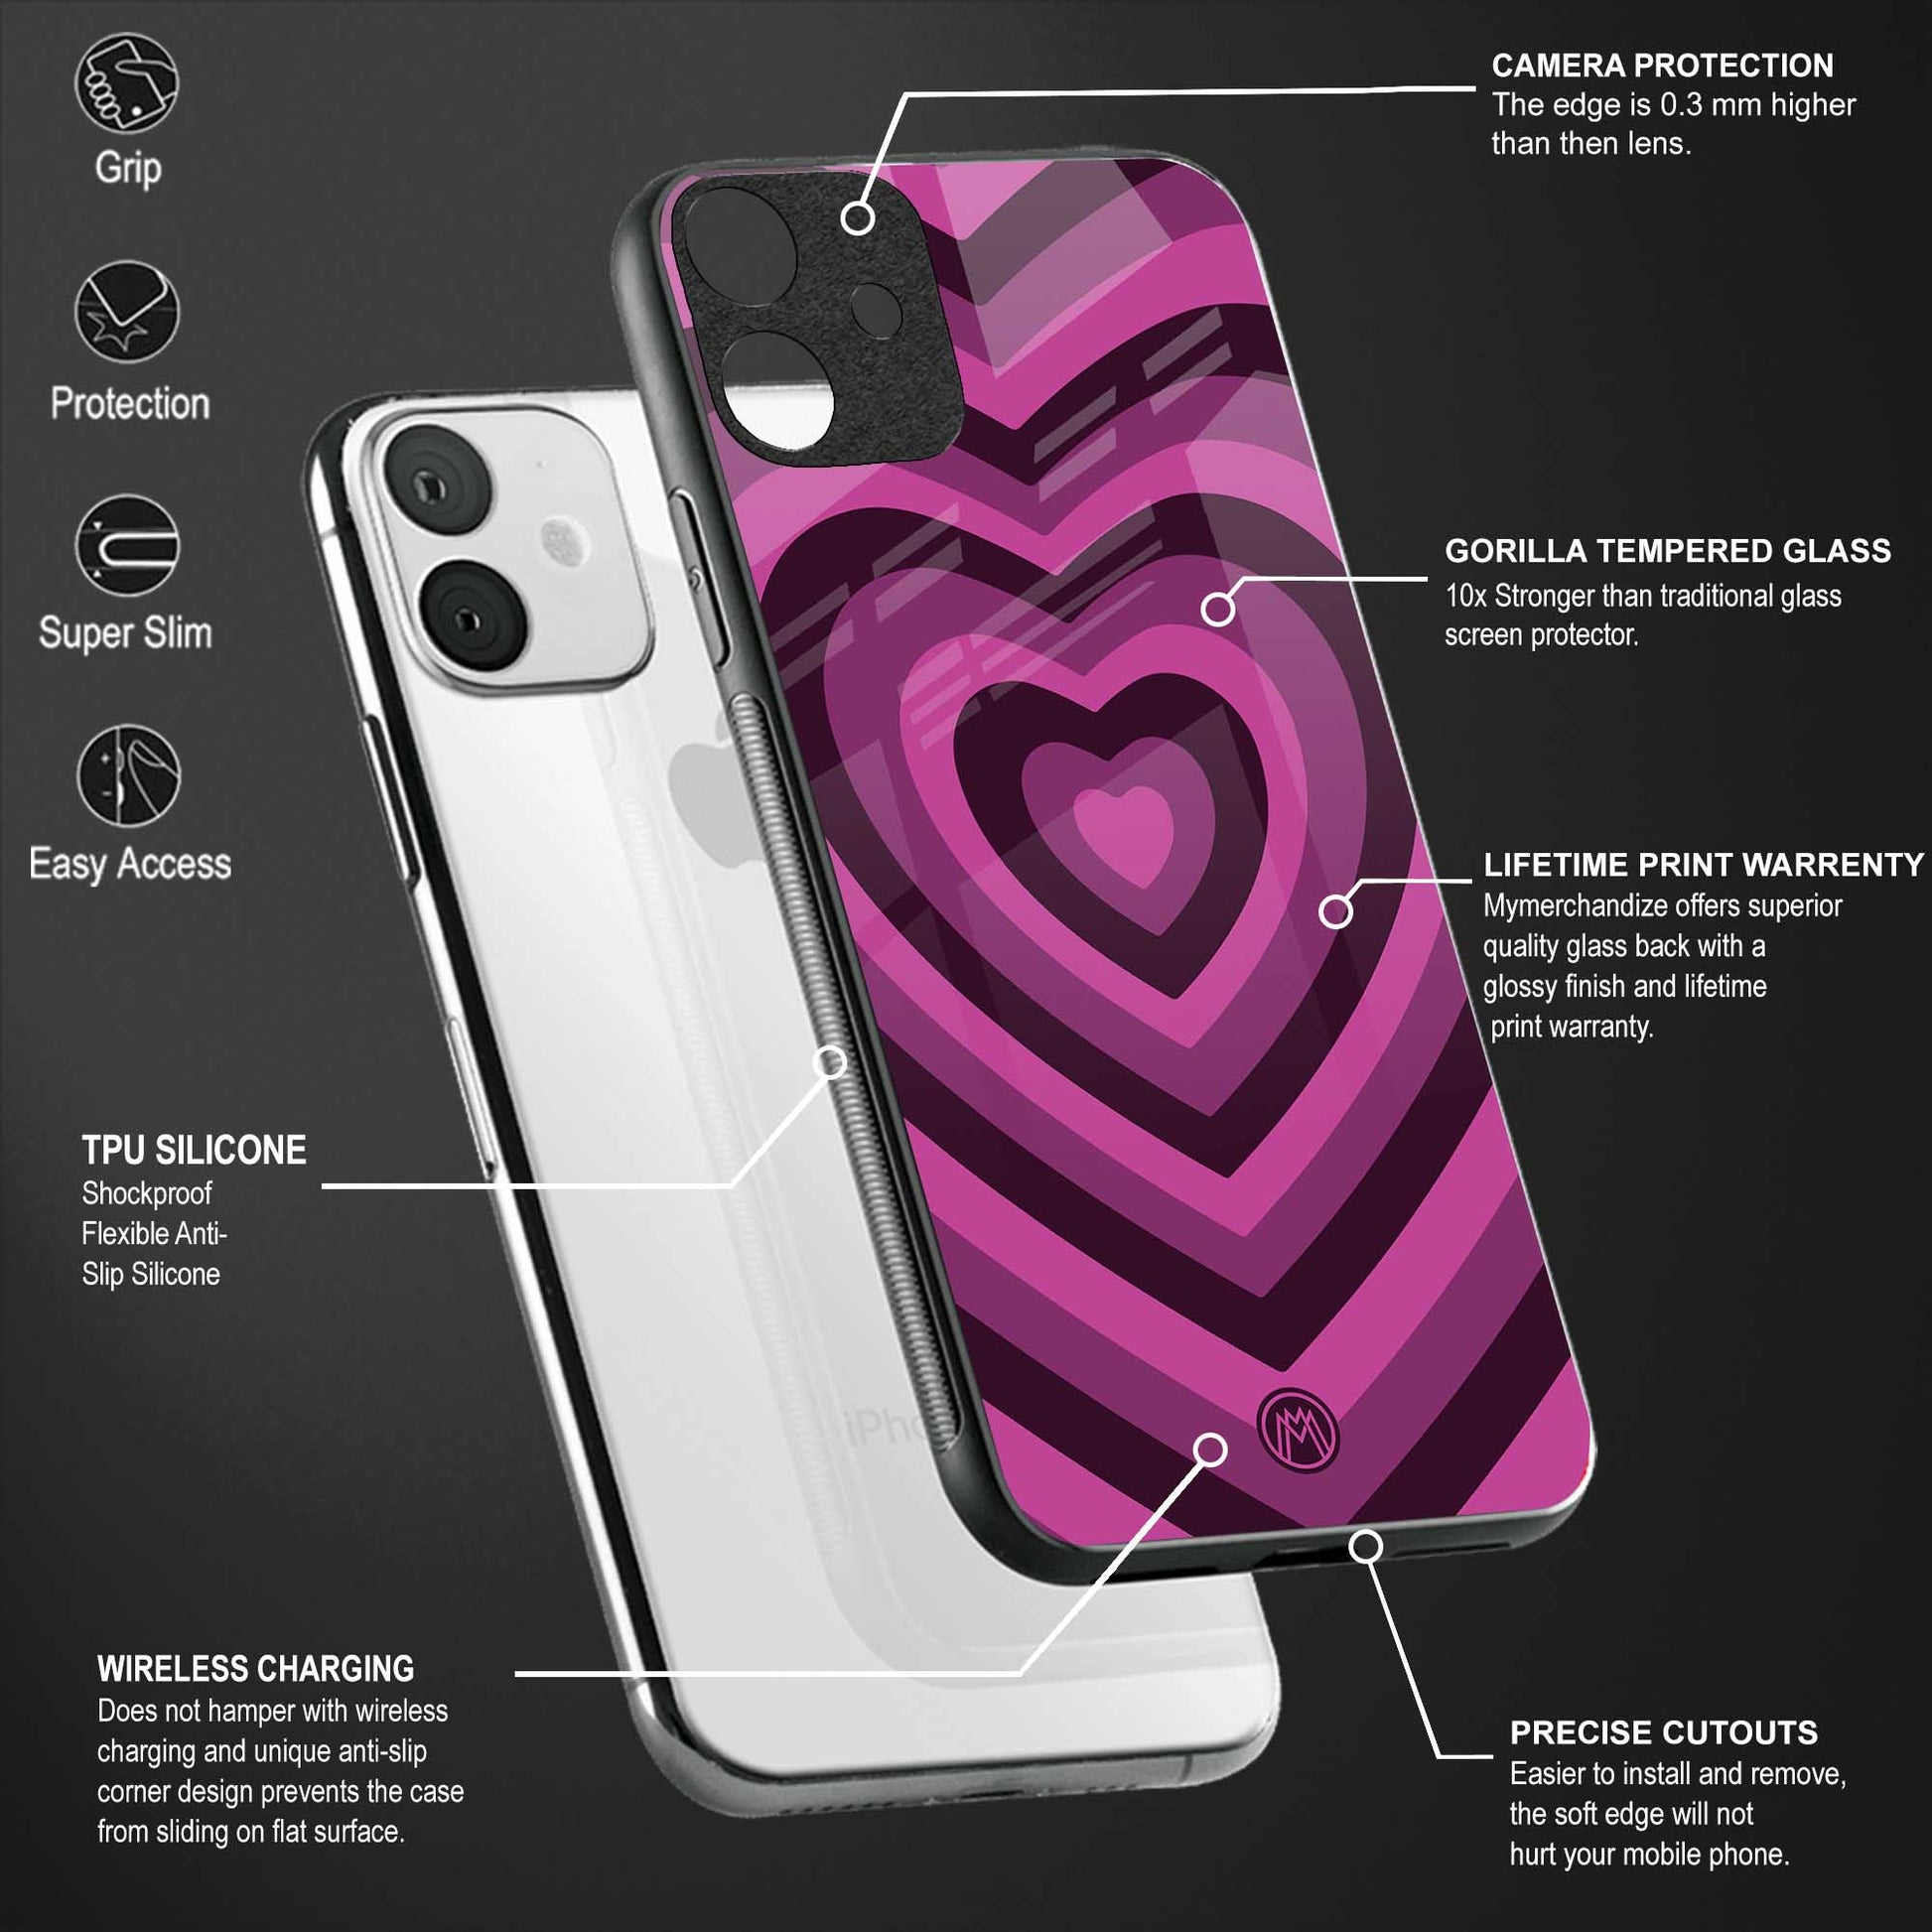 y2k burgundy hearts aesthetic back phone cover | glass case for samsung galaxy a13 4g